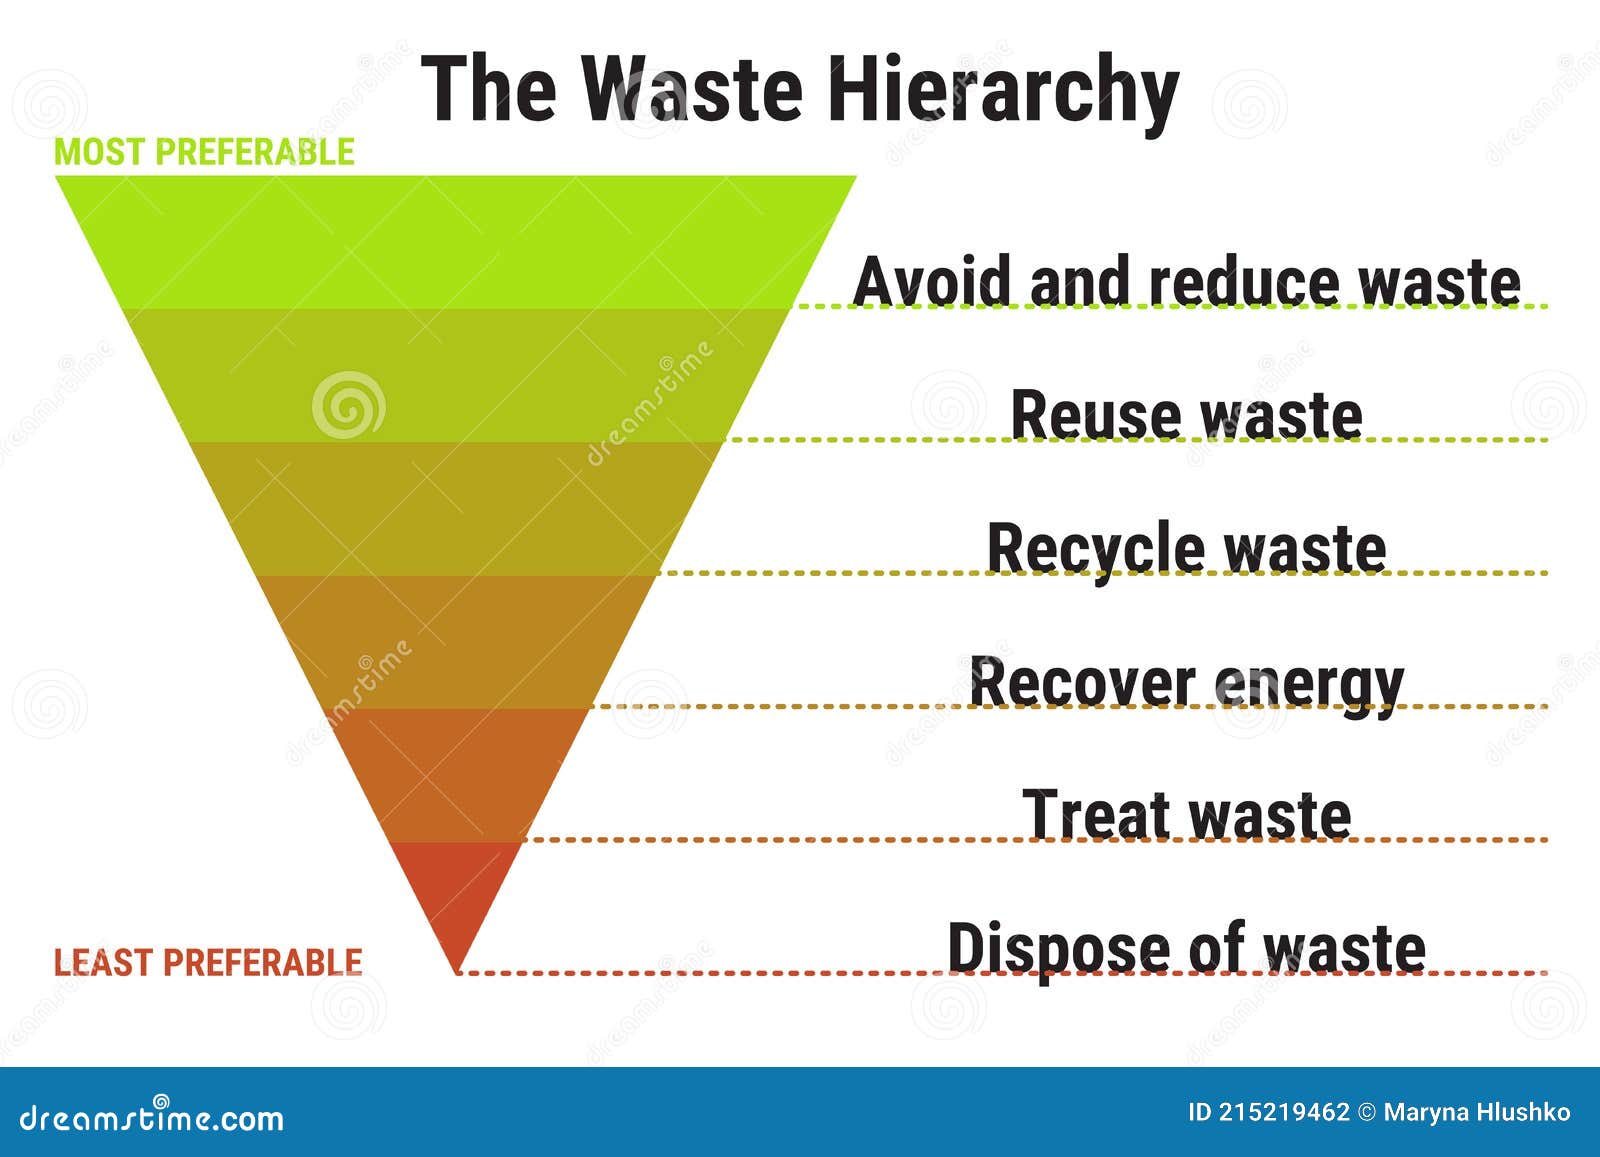 The Waste Hierarchy Prevention Minimization Reuse Recycling